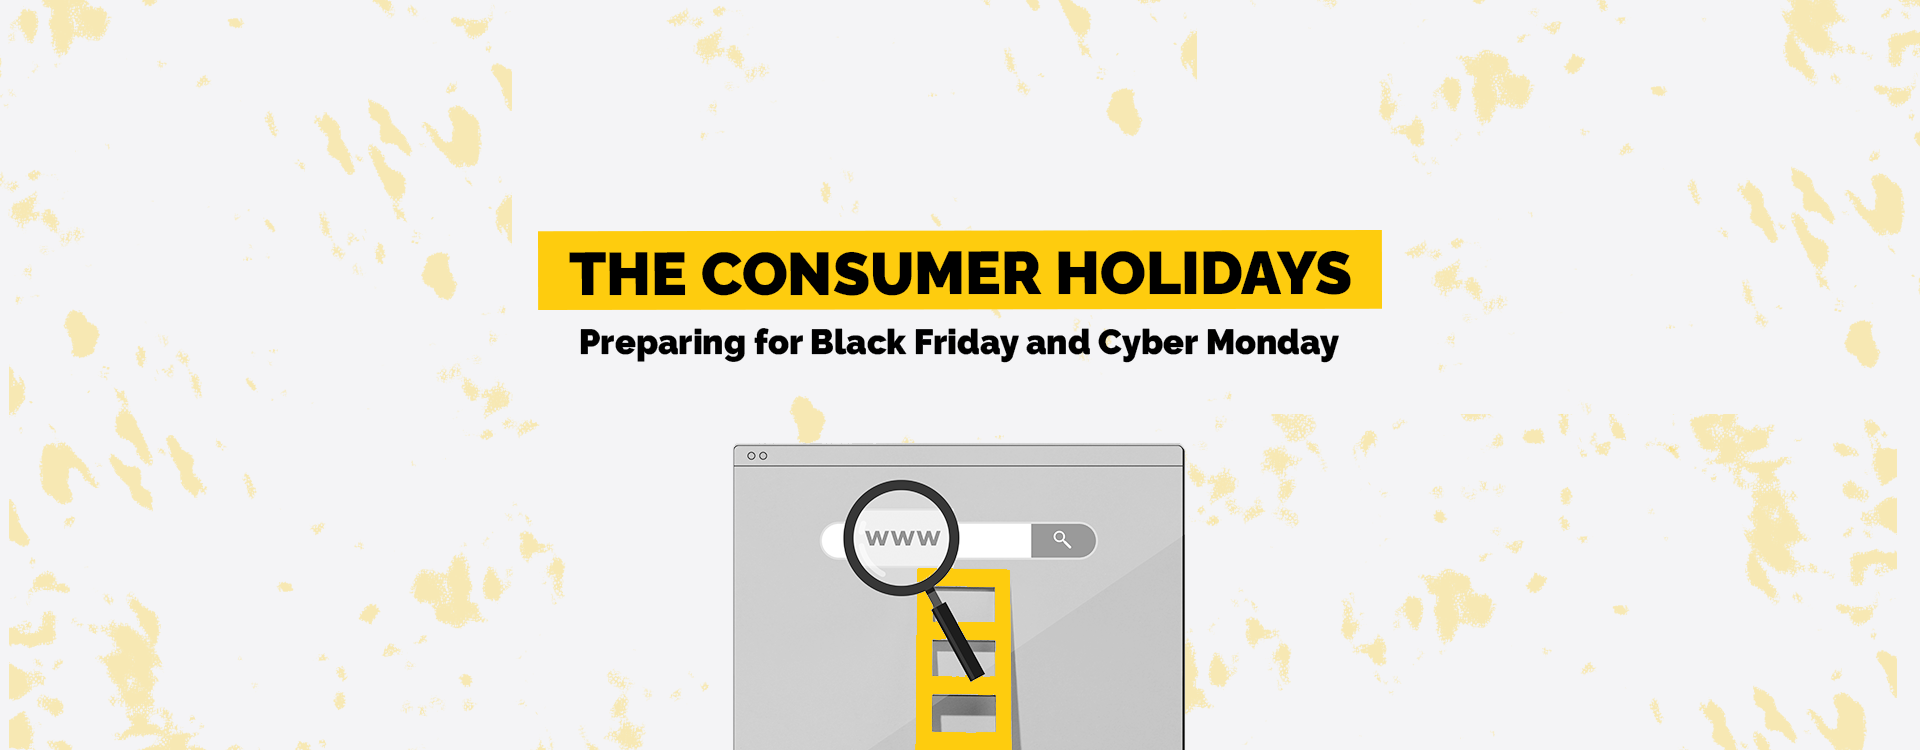 The Consumer Holidays: Preparing for Black Friday and Cyber Monday